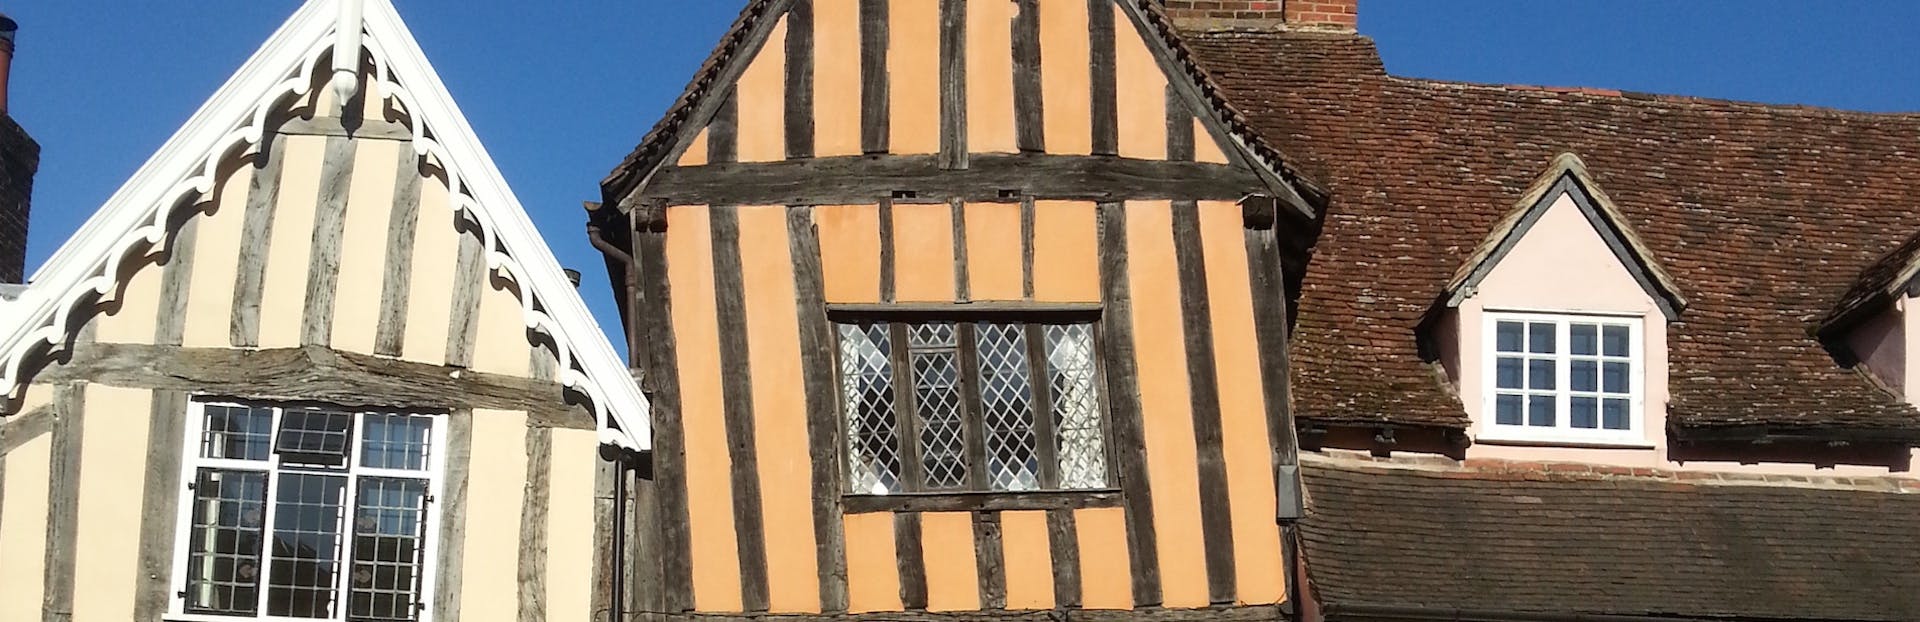 Discover Medieval Lavenham on a self-guided audio tour